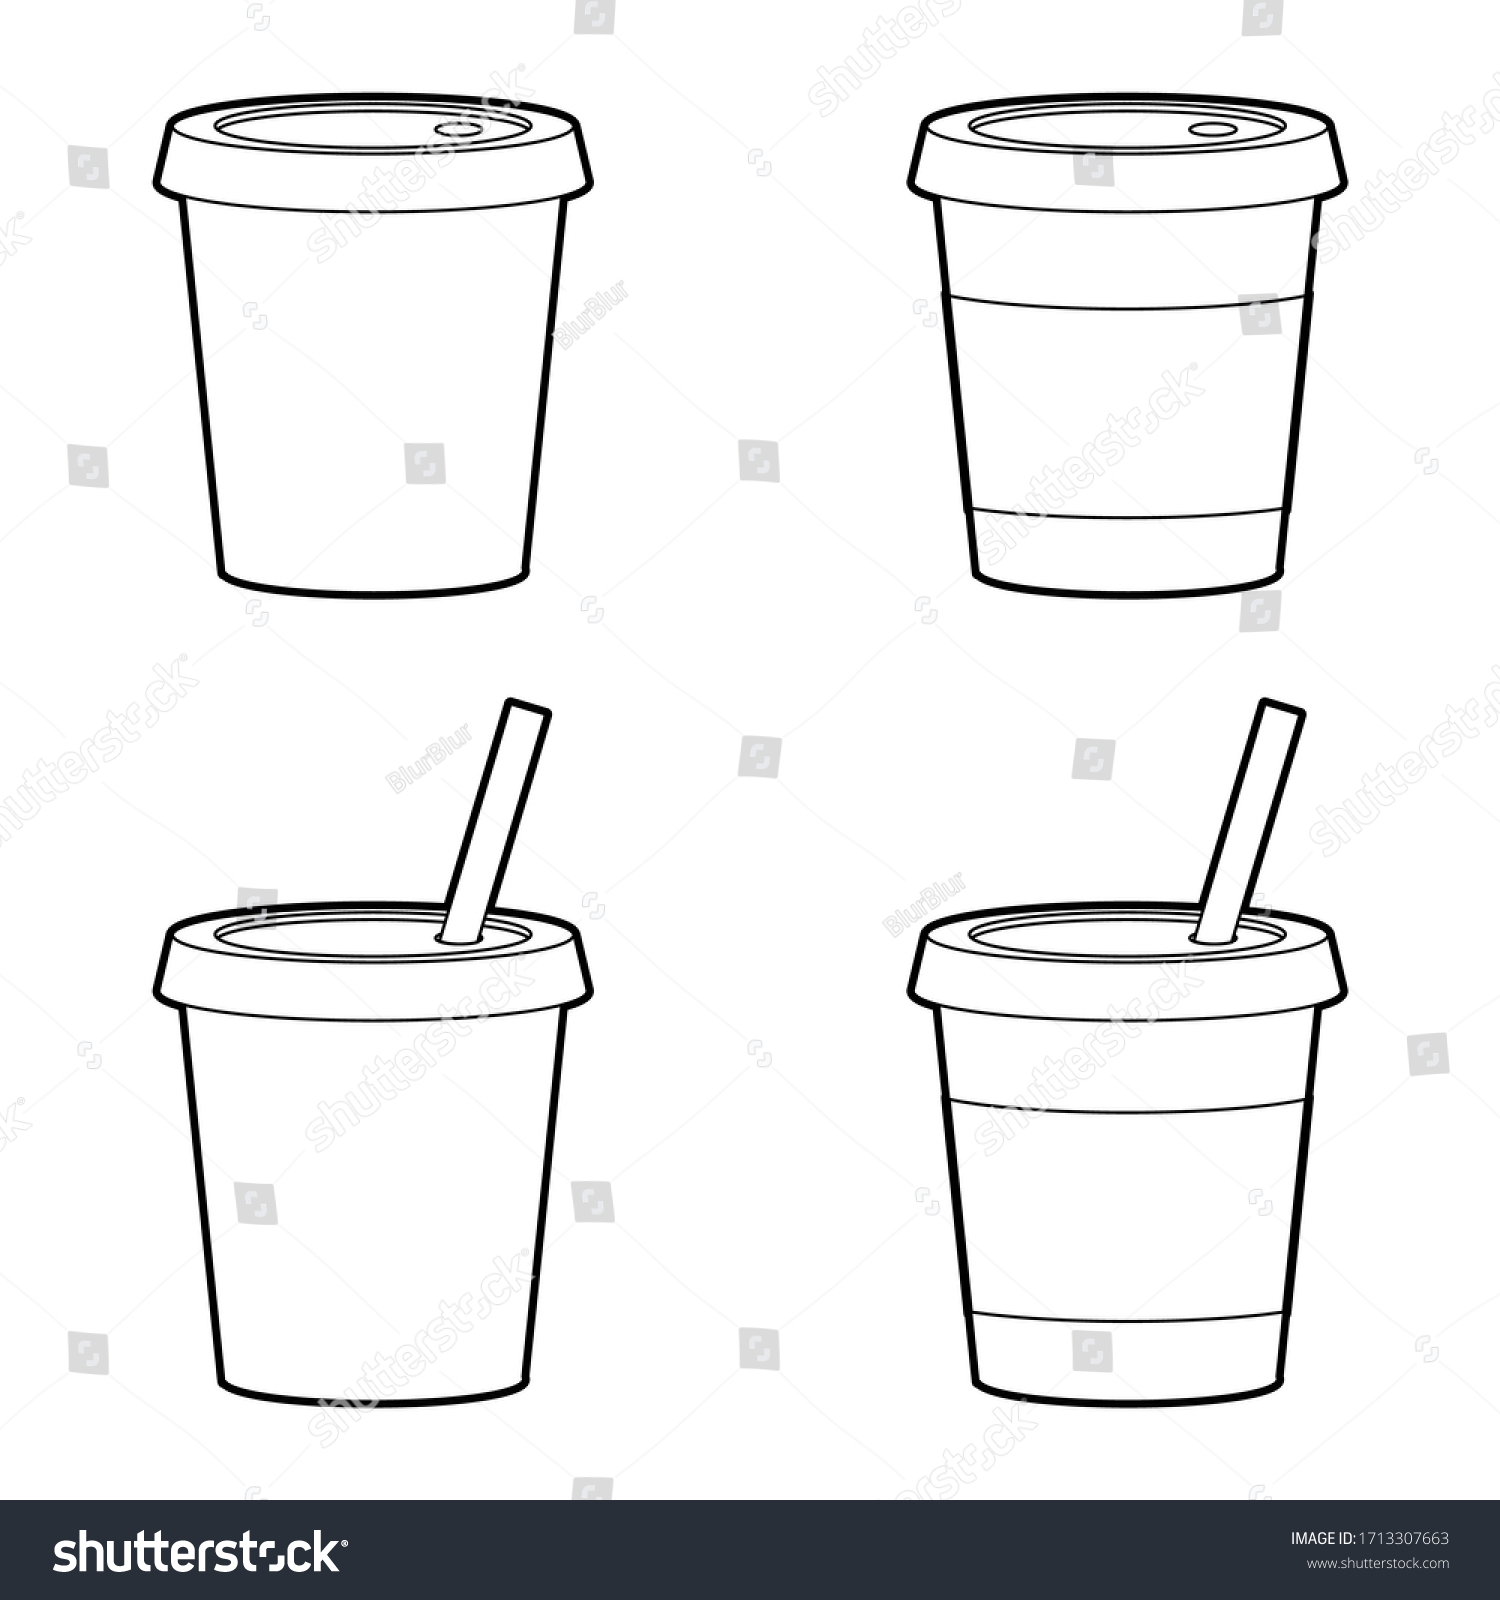 SVG of black and white glass of tea or coffee object, isolate, vector illustrator svg